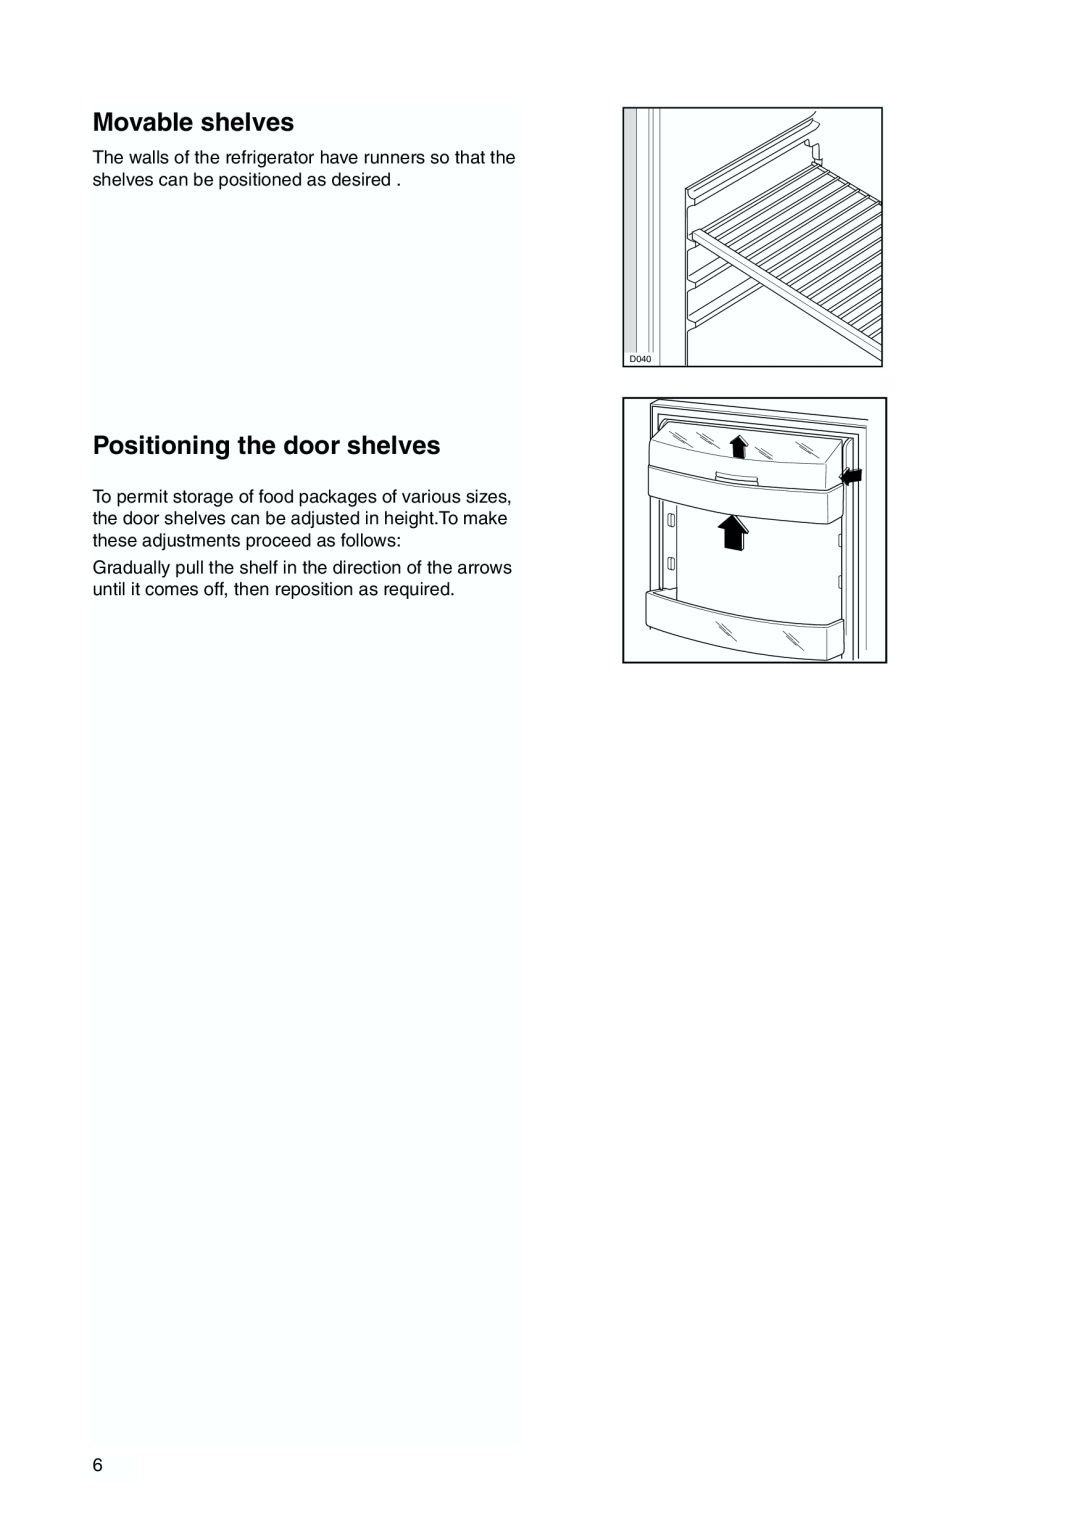 Tricity Bendix TBFF 55 installation instructions Movable shelves, Positioning the door shelves, D040 